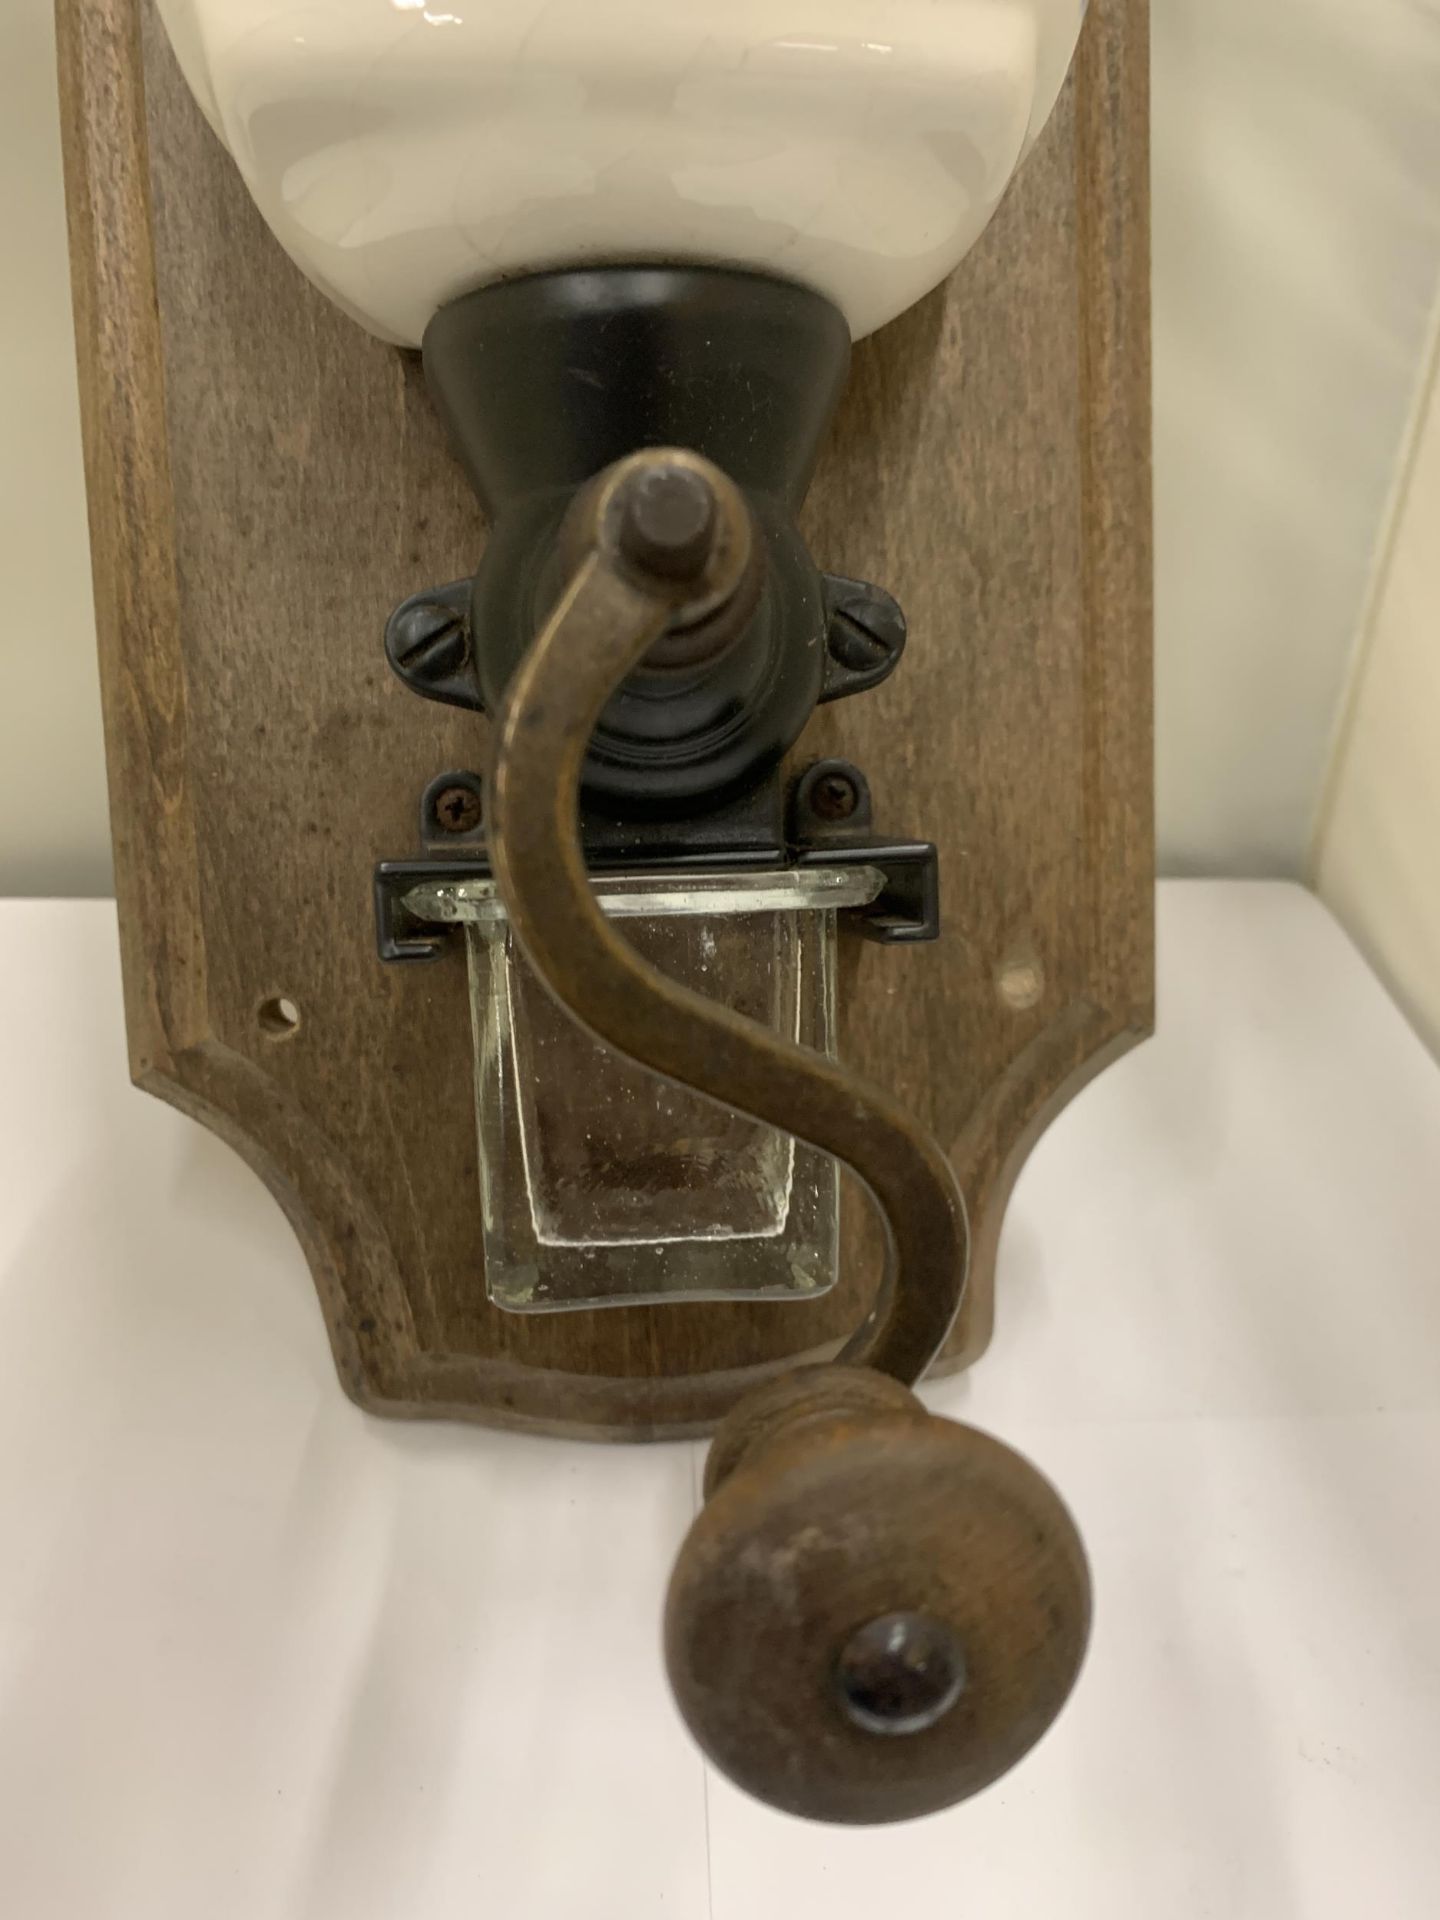 A VINTAGE ZASSENHAUS COFFEE GRINDER ON A WALL MOUNTING PLAQUE WITH A BLUE AND WHITE WARE CHAMBER - Image 3 of 5